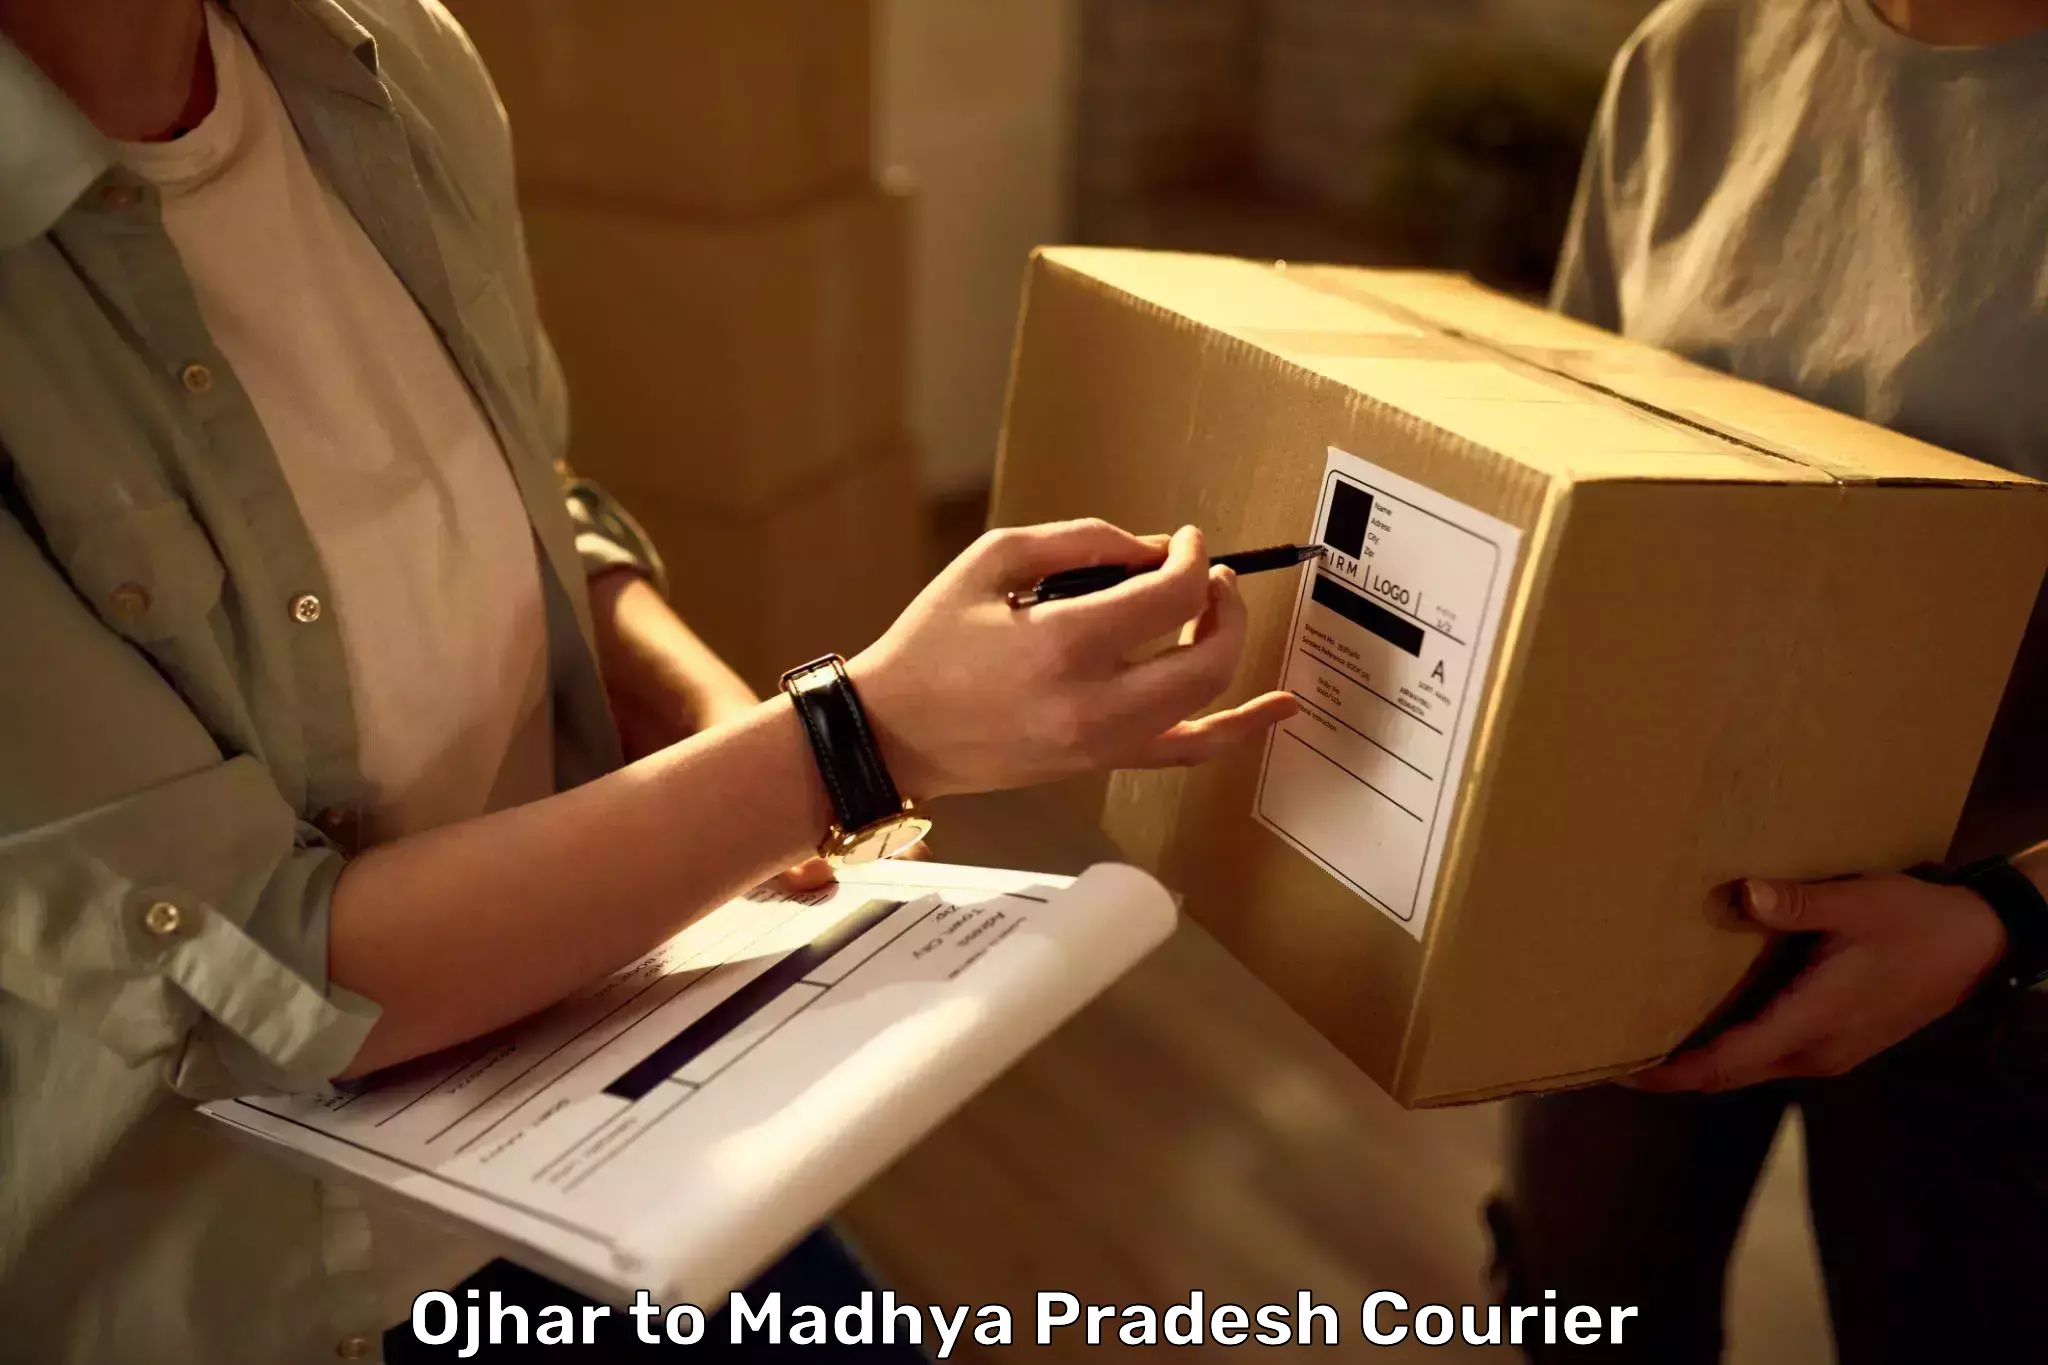 Personal effects shipping in Ojhar to Ratlam